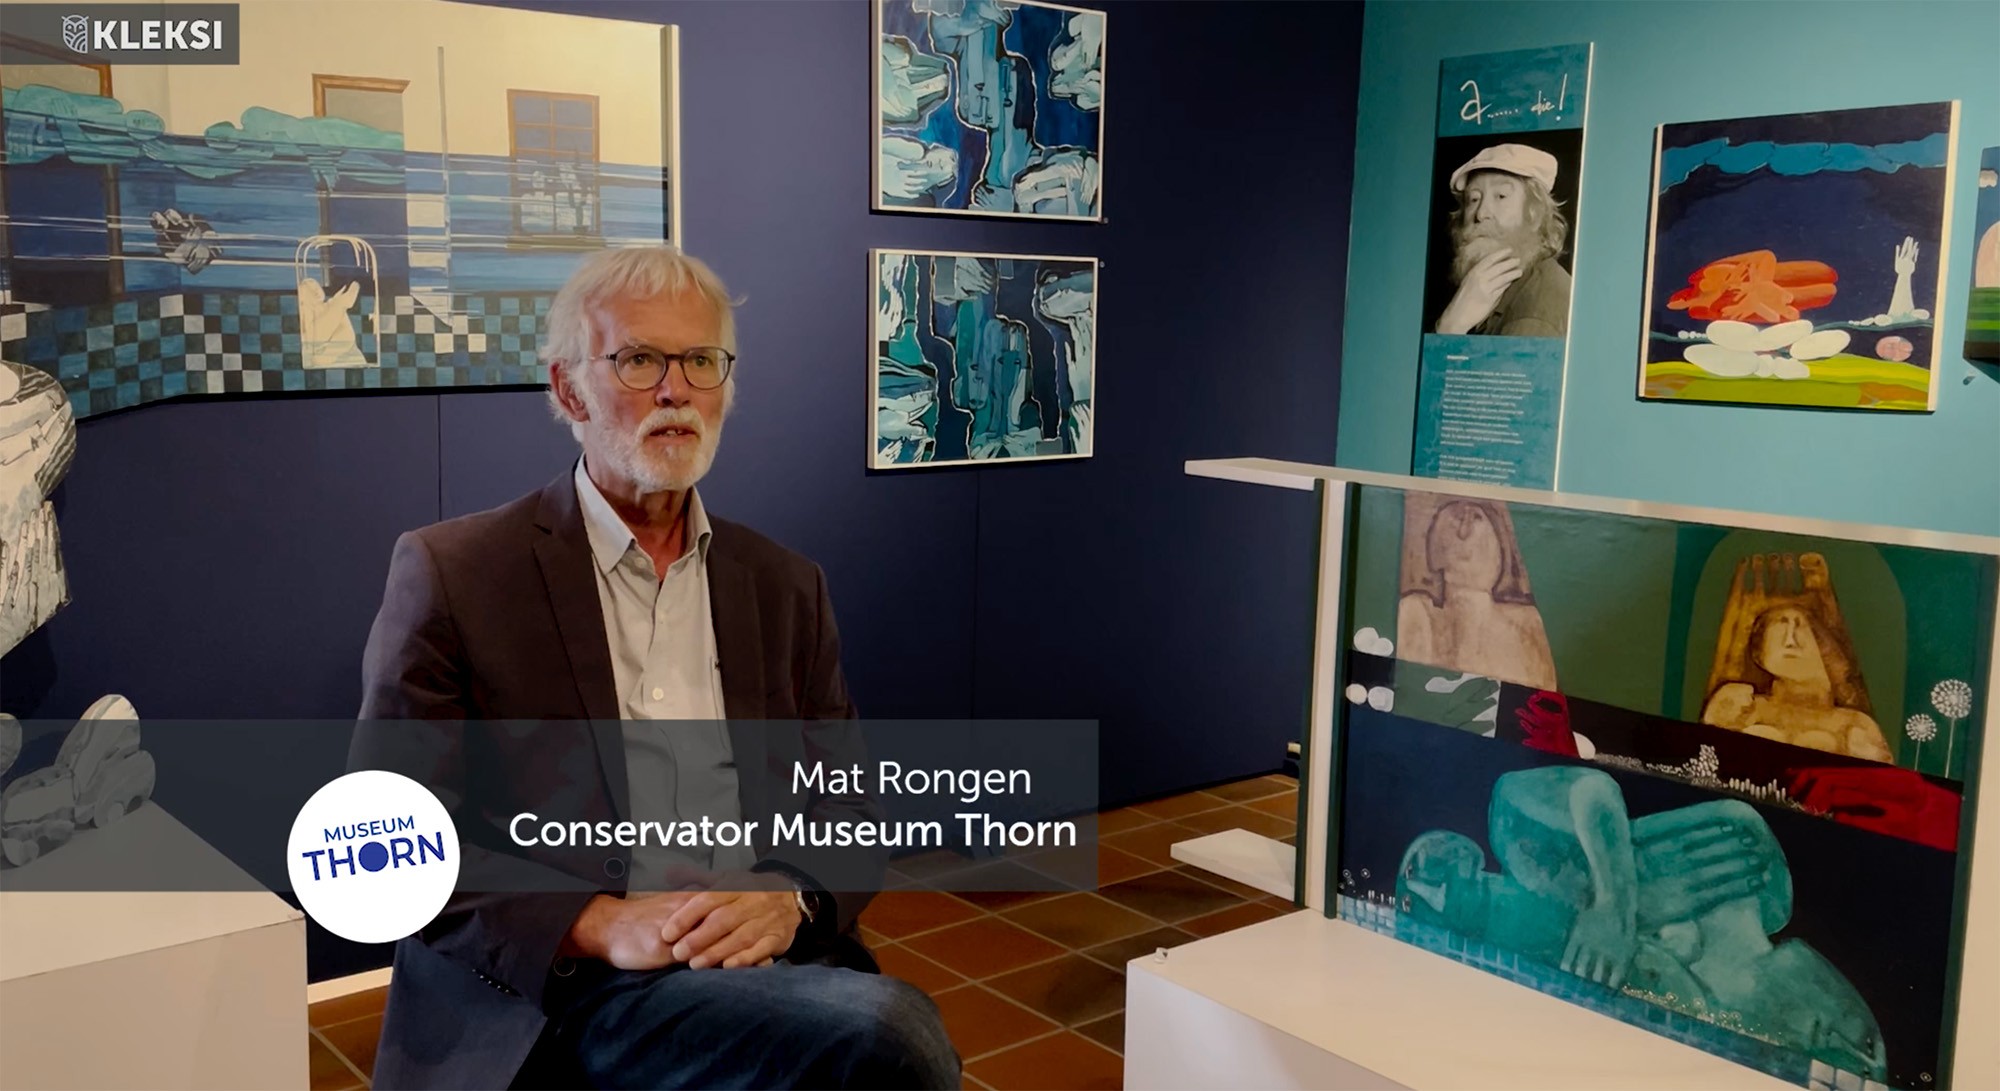 Mat Rongen, curator Museum Thorn works with the KLEKSI collection registration system and tells about his experience